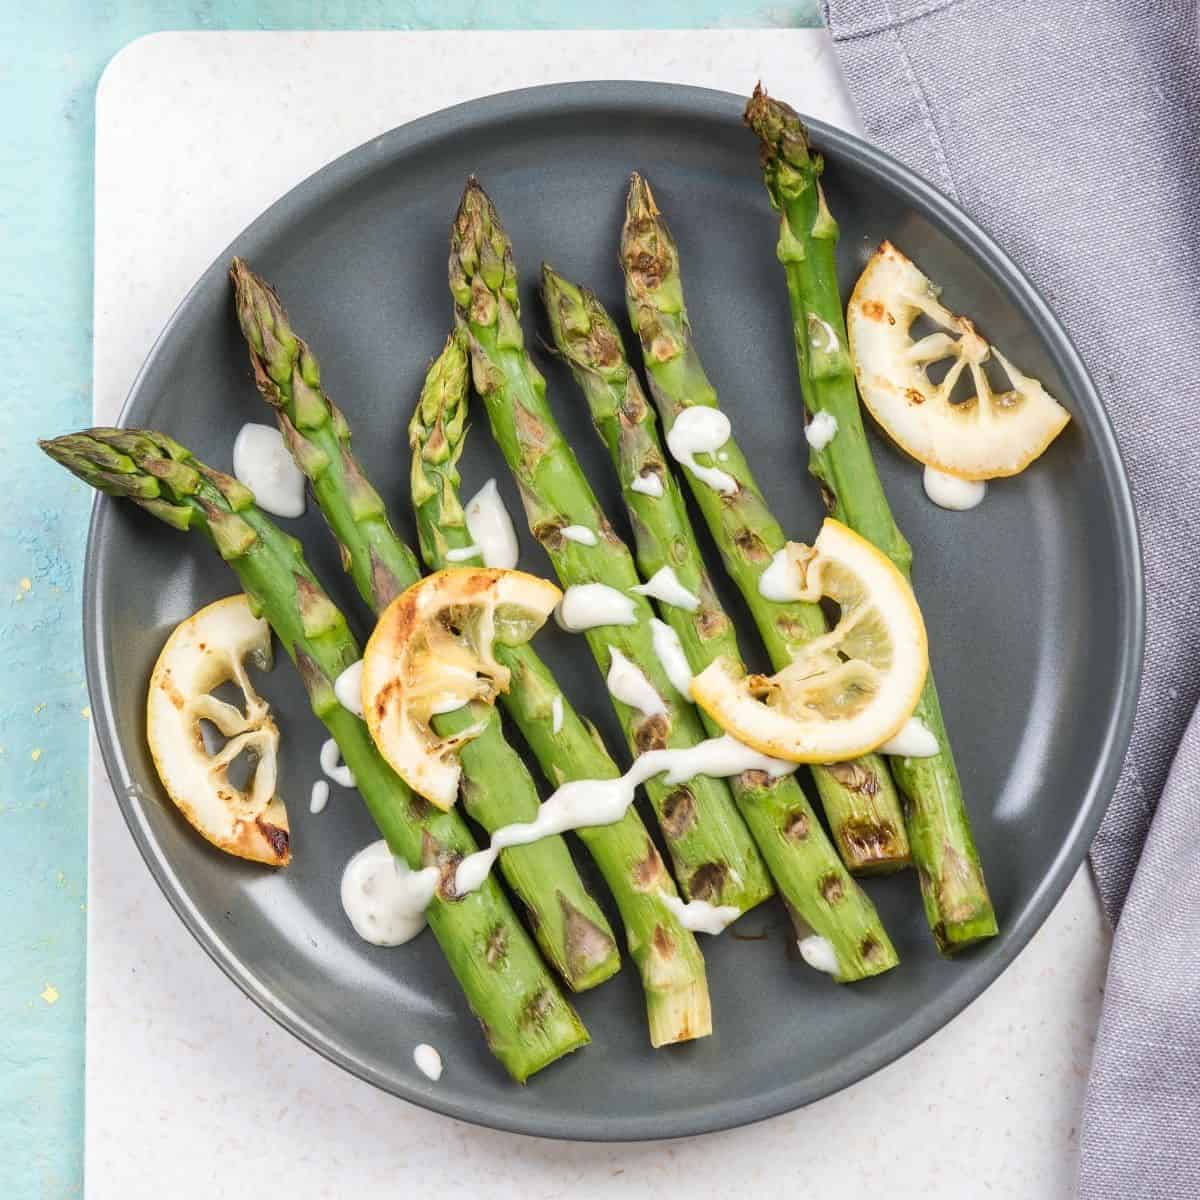 How to cook asparagus: 5 of the simplest techniques